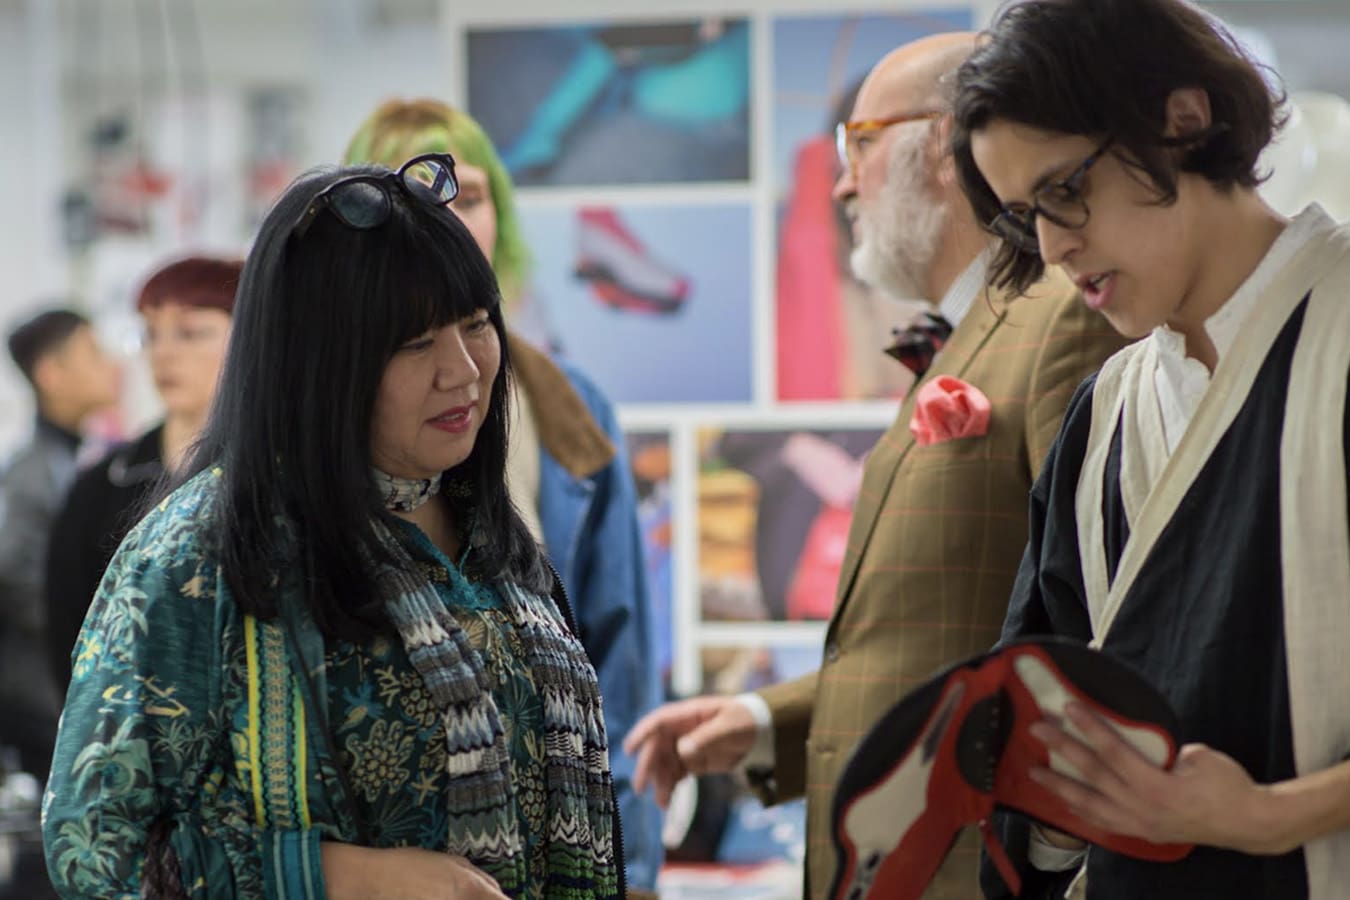 Fashion Designer Anna Sui viewing the work of fashion design students